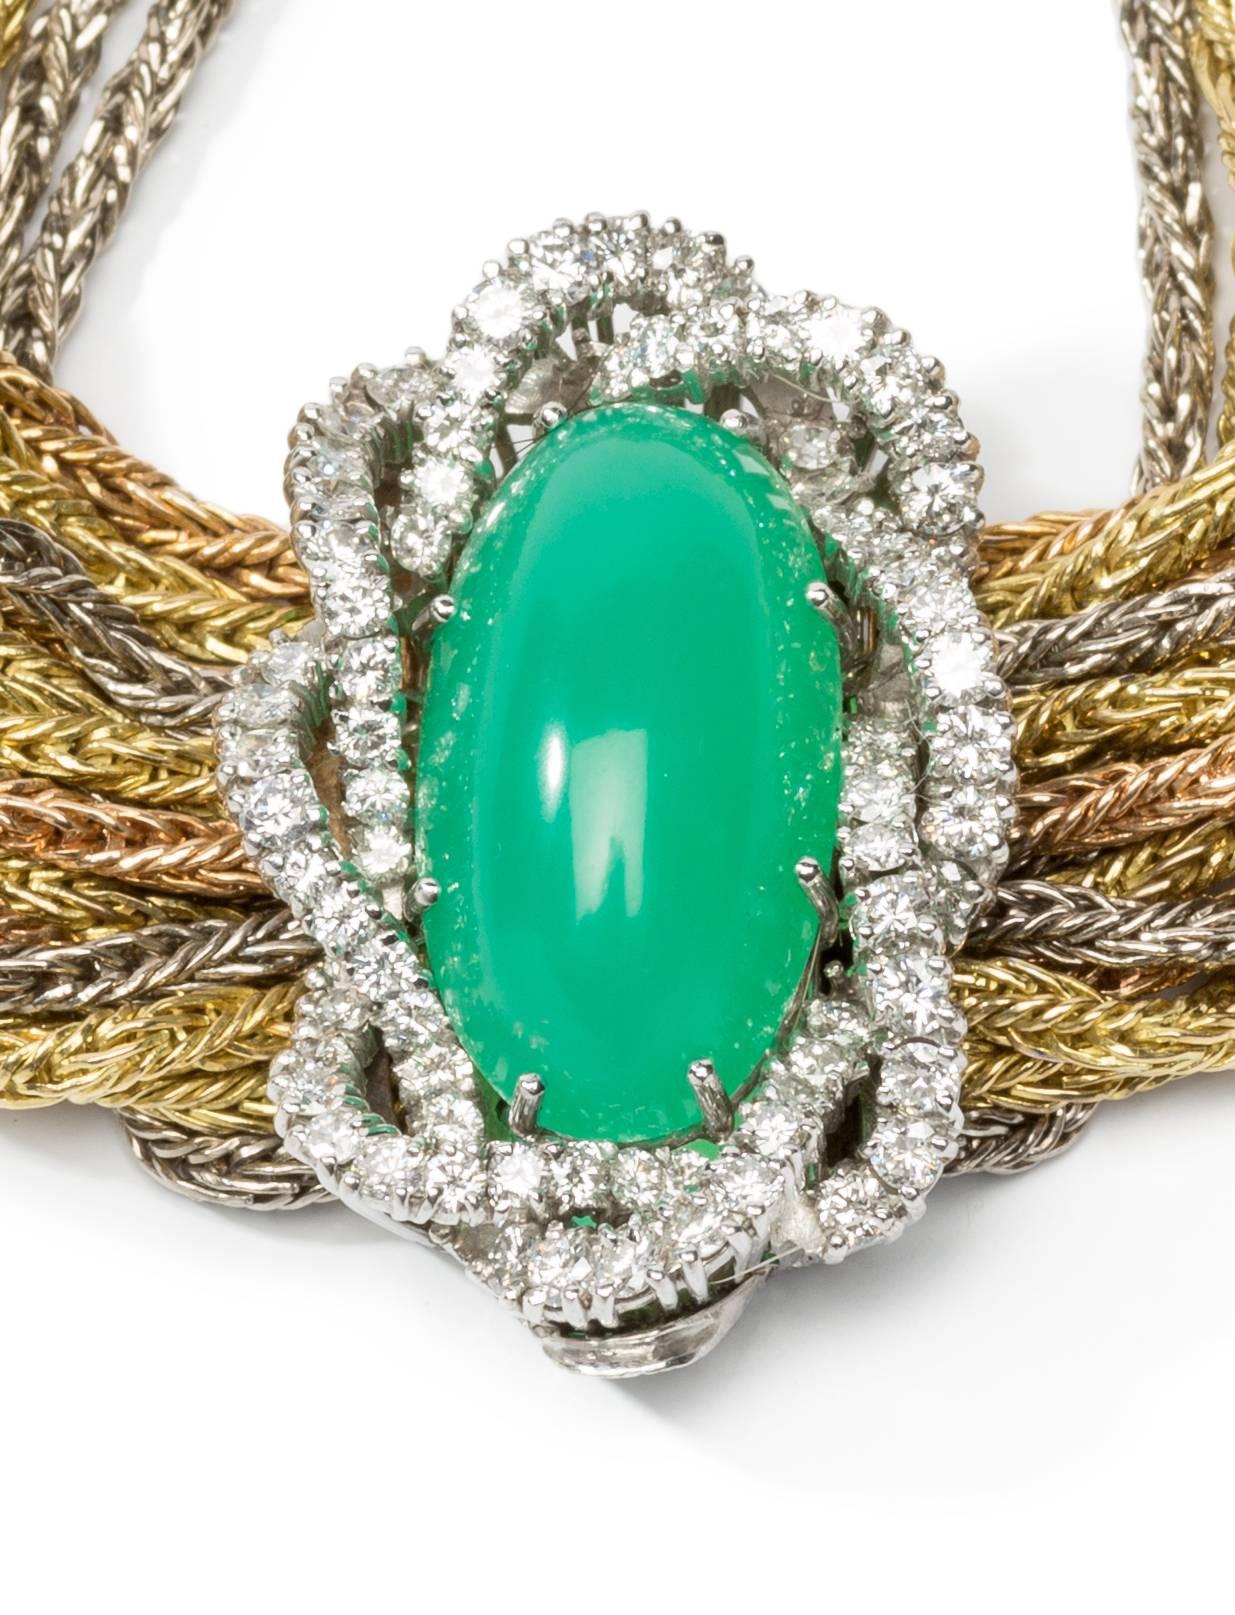 Chrysoprase Cabochon Diamond Braided Gold Bracelet In Excellent Condition For Sale In Berlin, DE